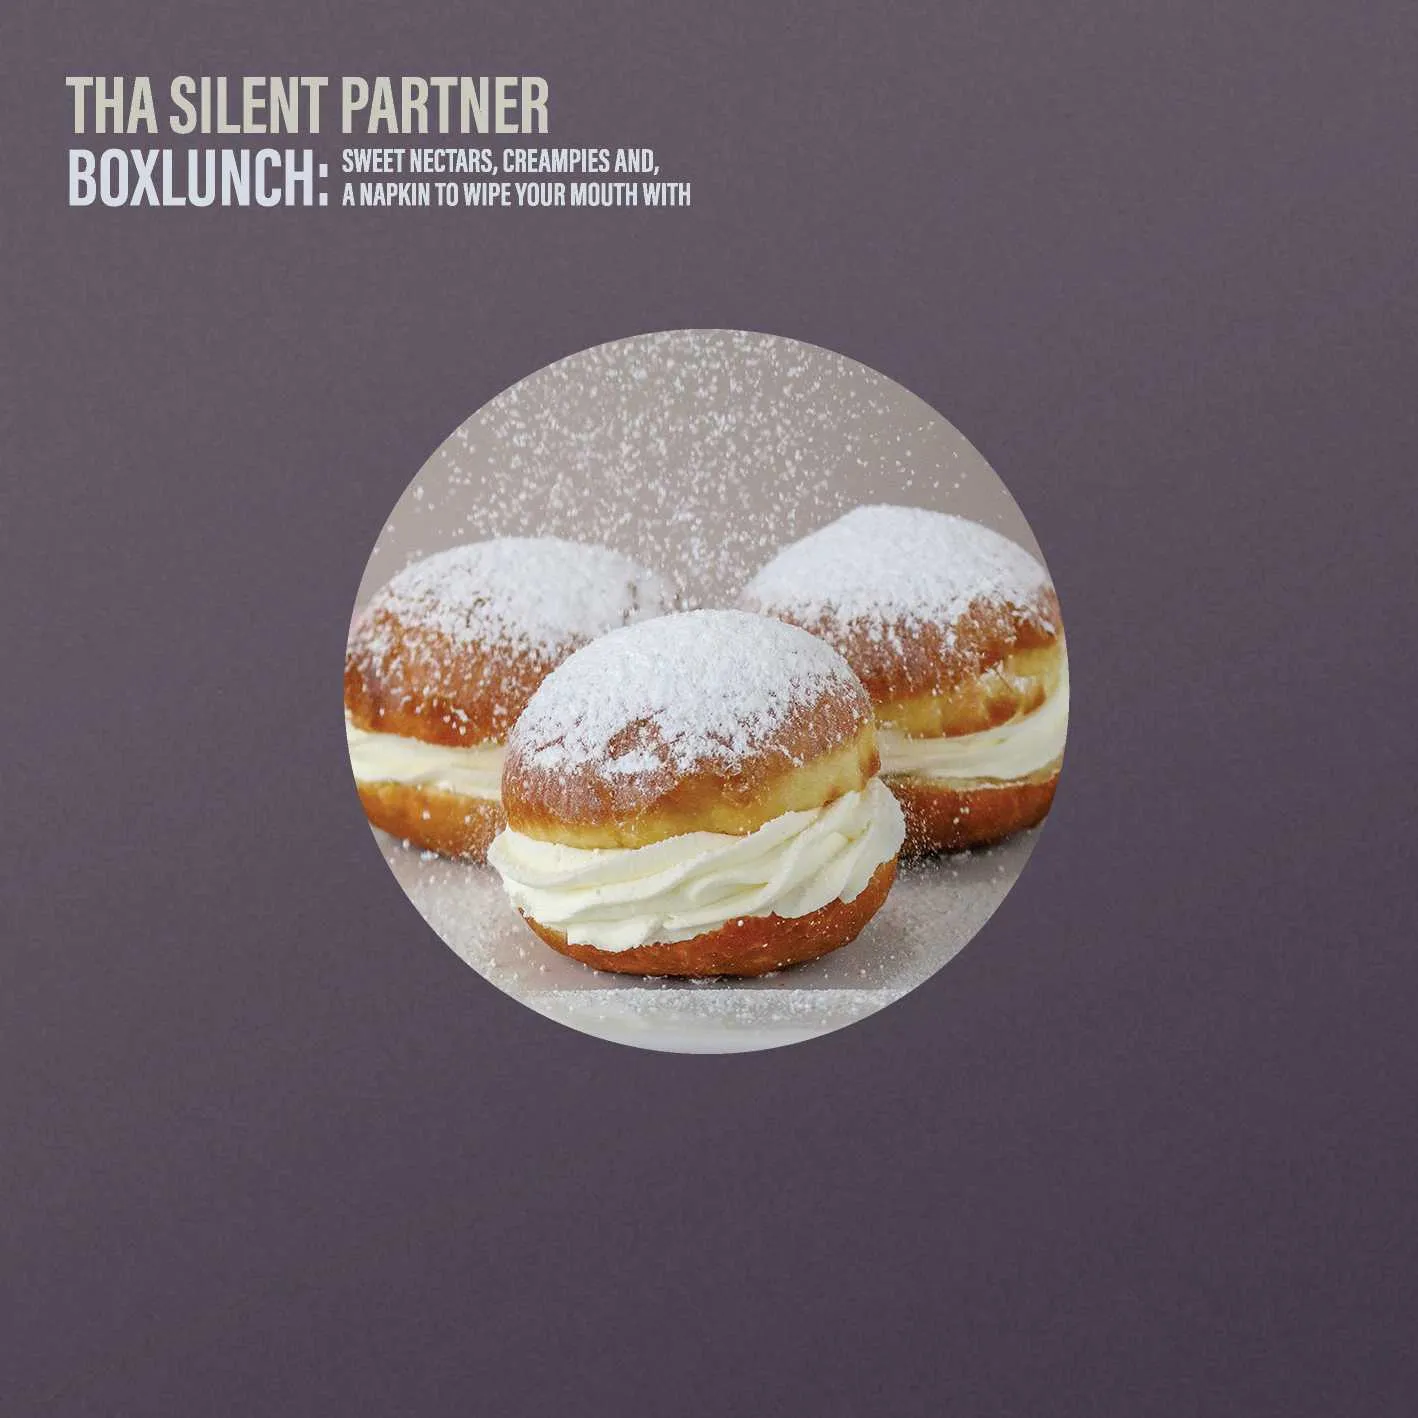 Album cover for “BOXLUNCH: Sweet Nectars, Creampies And, A Napkin To Wipe Your Mouth With” by Tha Silent Partner